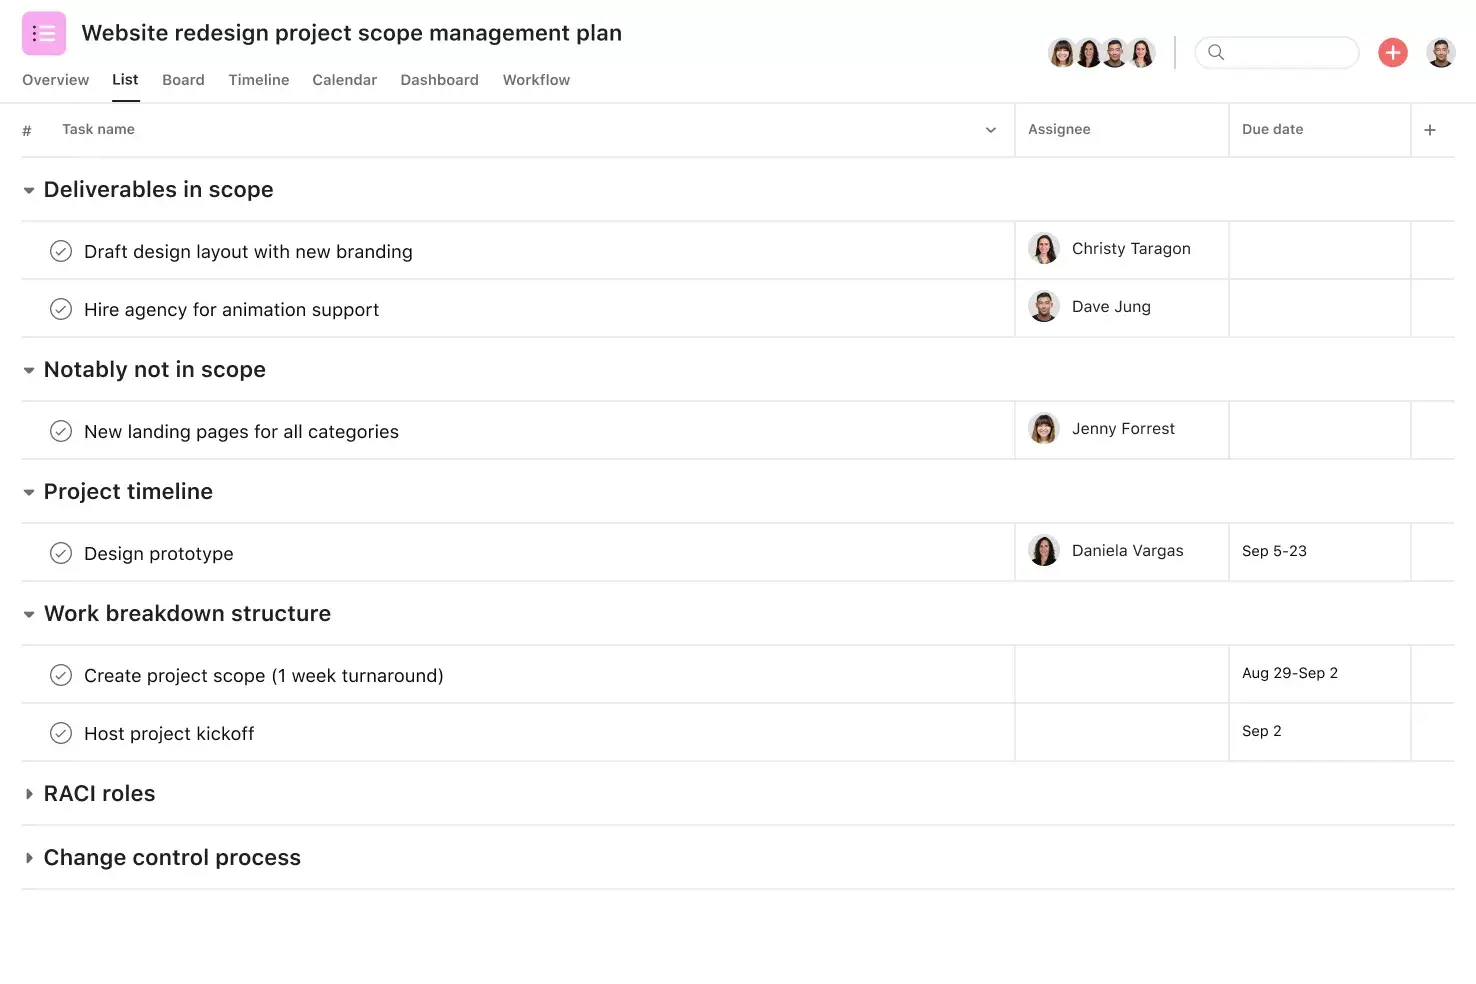 [Product ui] Scope management project in Asana, spreadsheet-style project view (List)